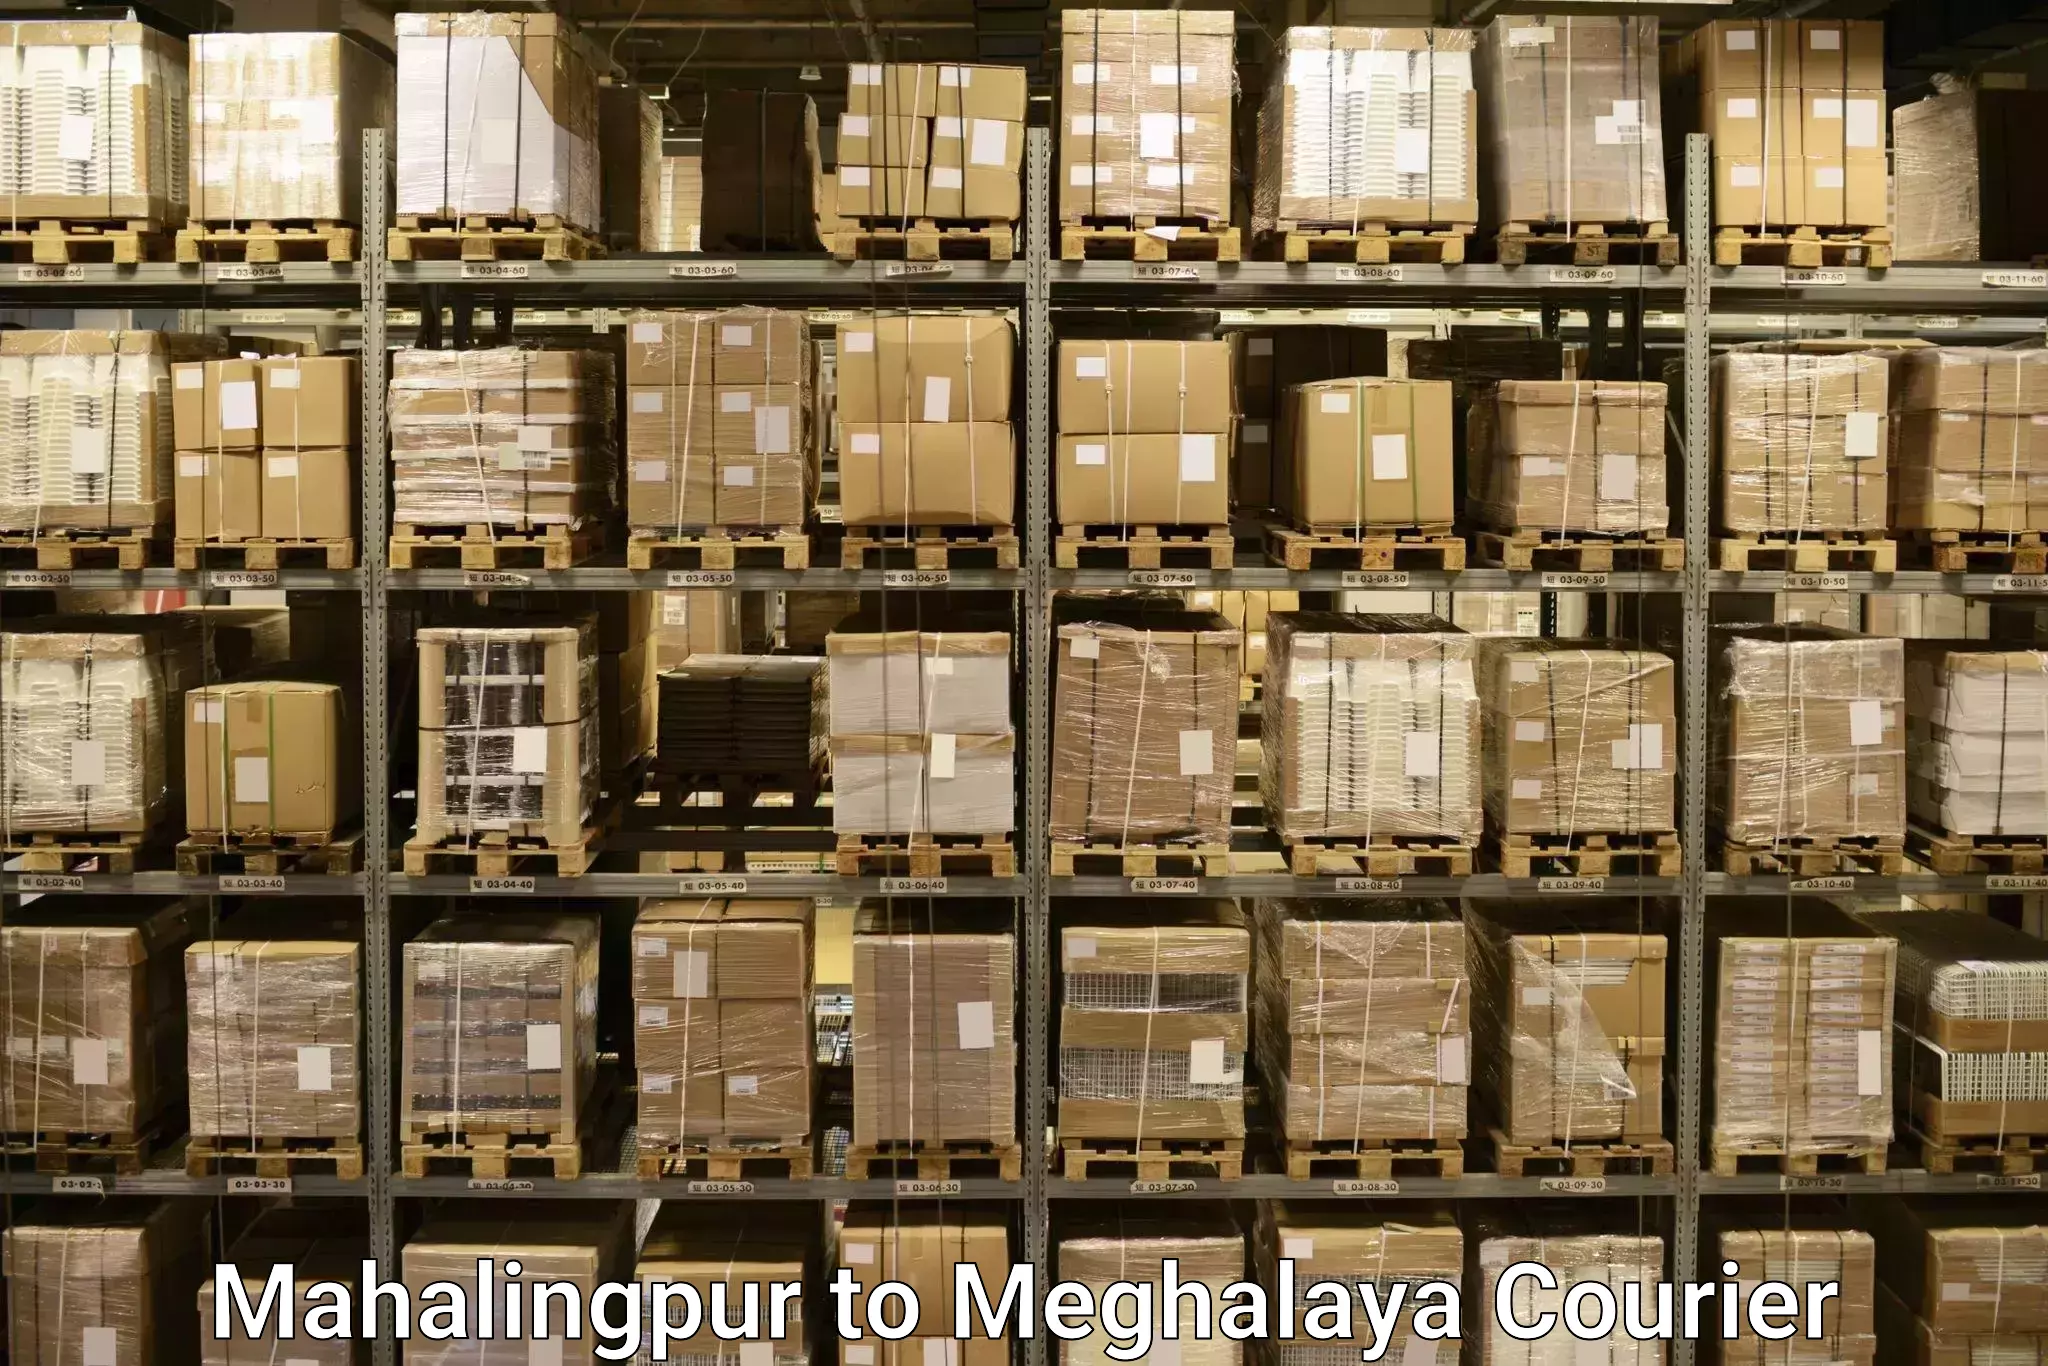 Luggage shipment specialists Mahalingpur to Nongstoin